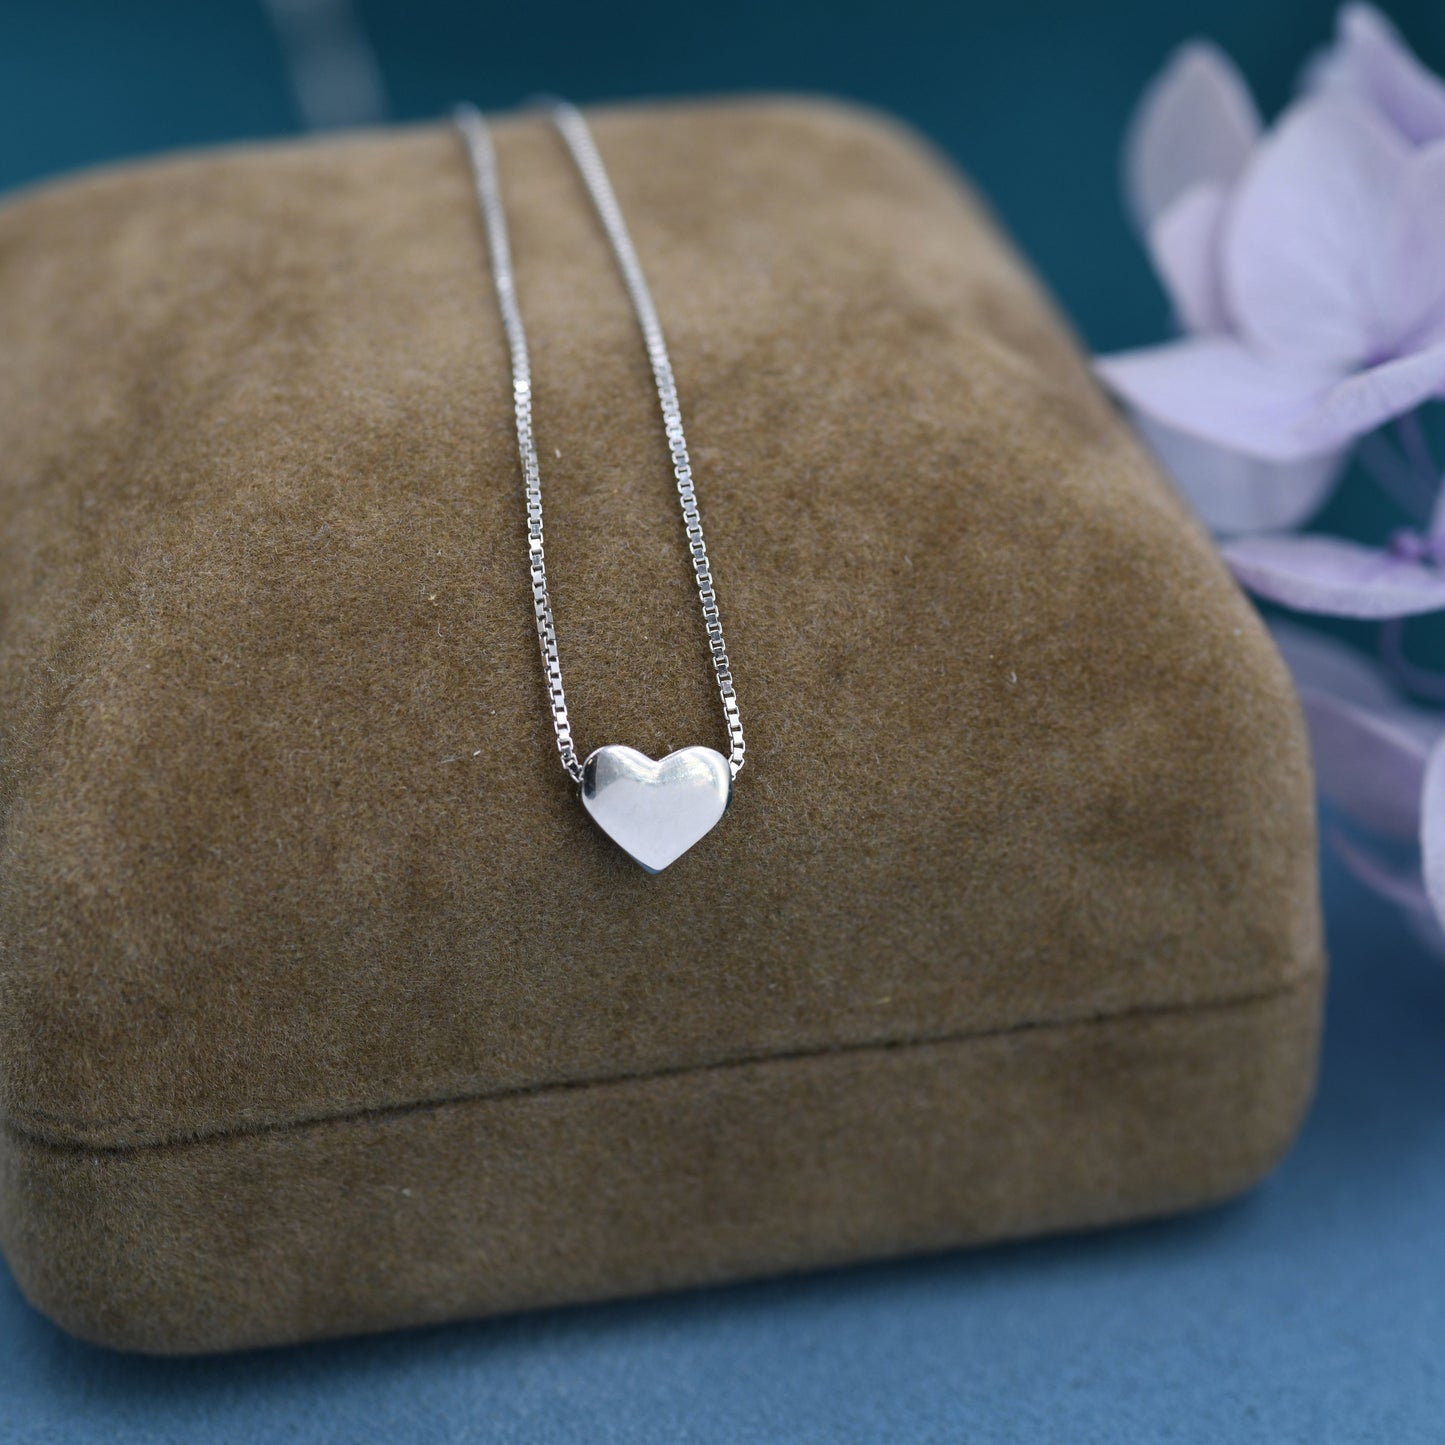 Minimalist Heart Pendant Necklace in Sterling Silver,  Tiny Heart Necklace, Sweet and Cute